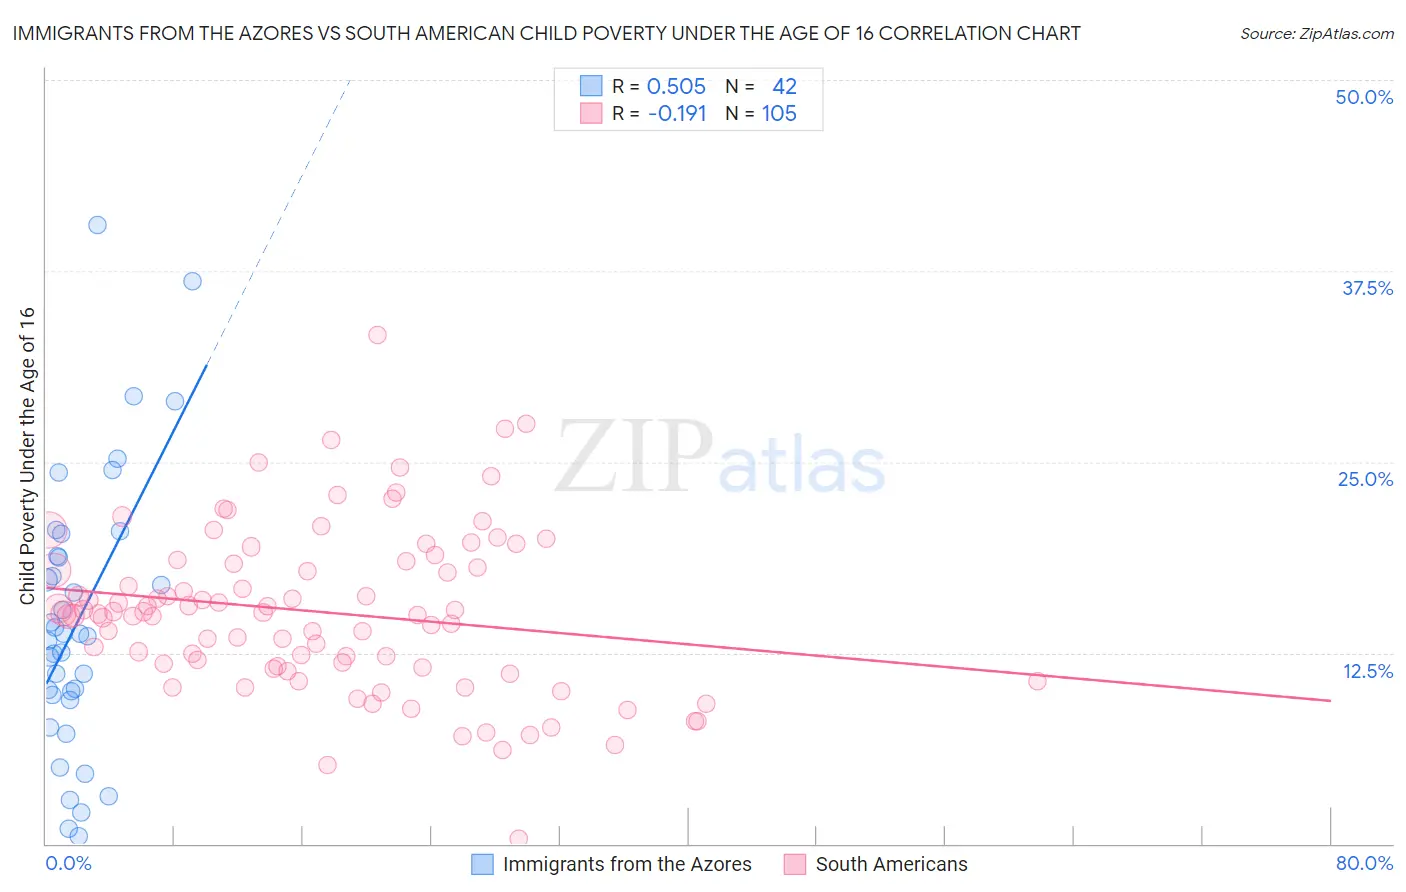 Immigrants from the Azores vs South American Child Poverty Under the Age of 16